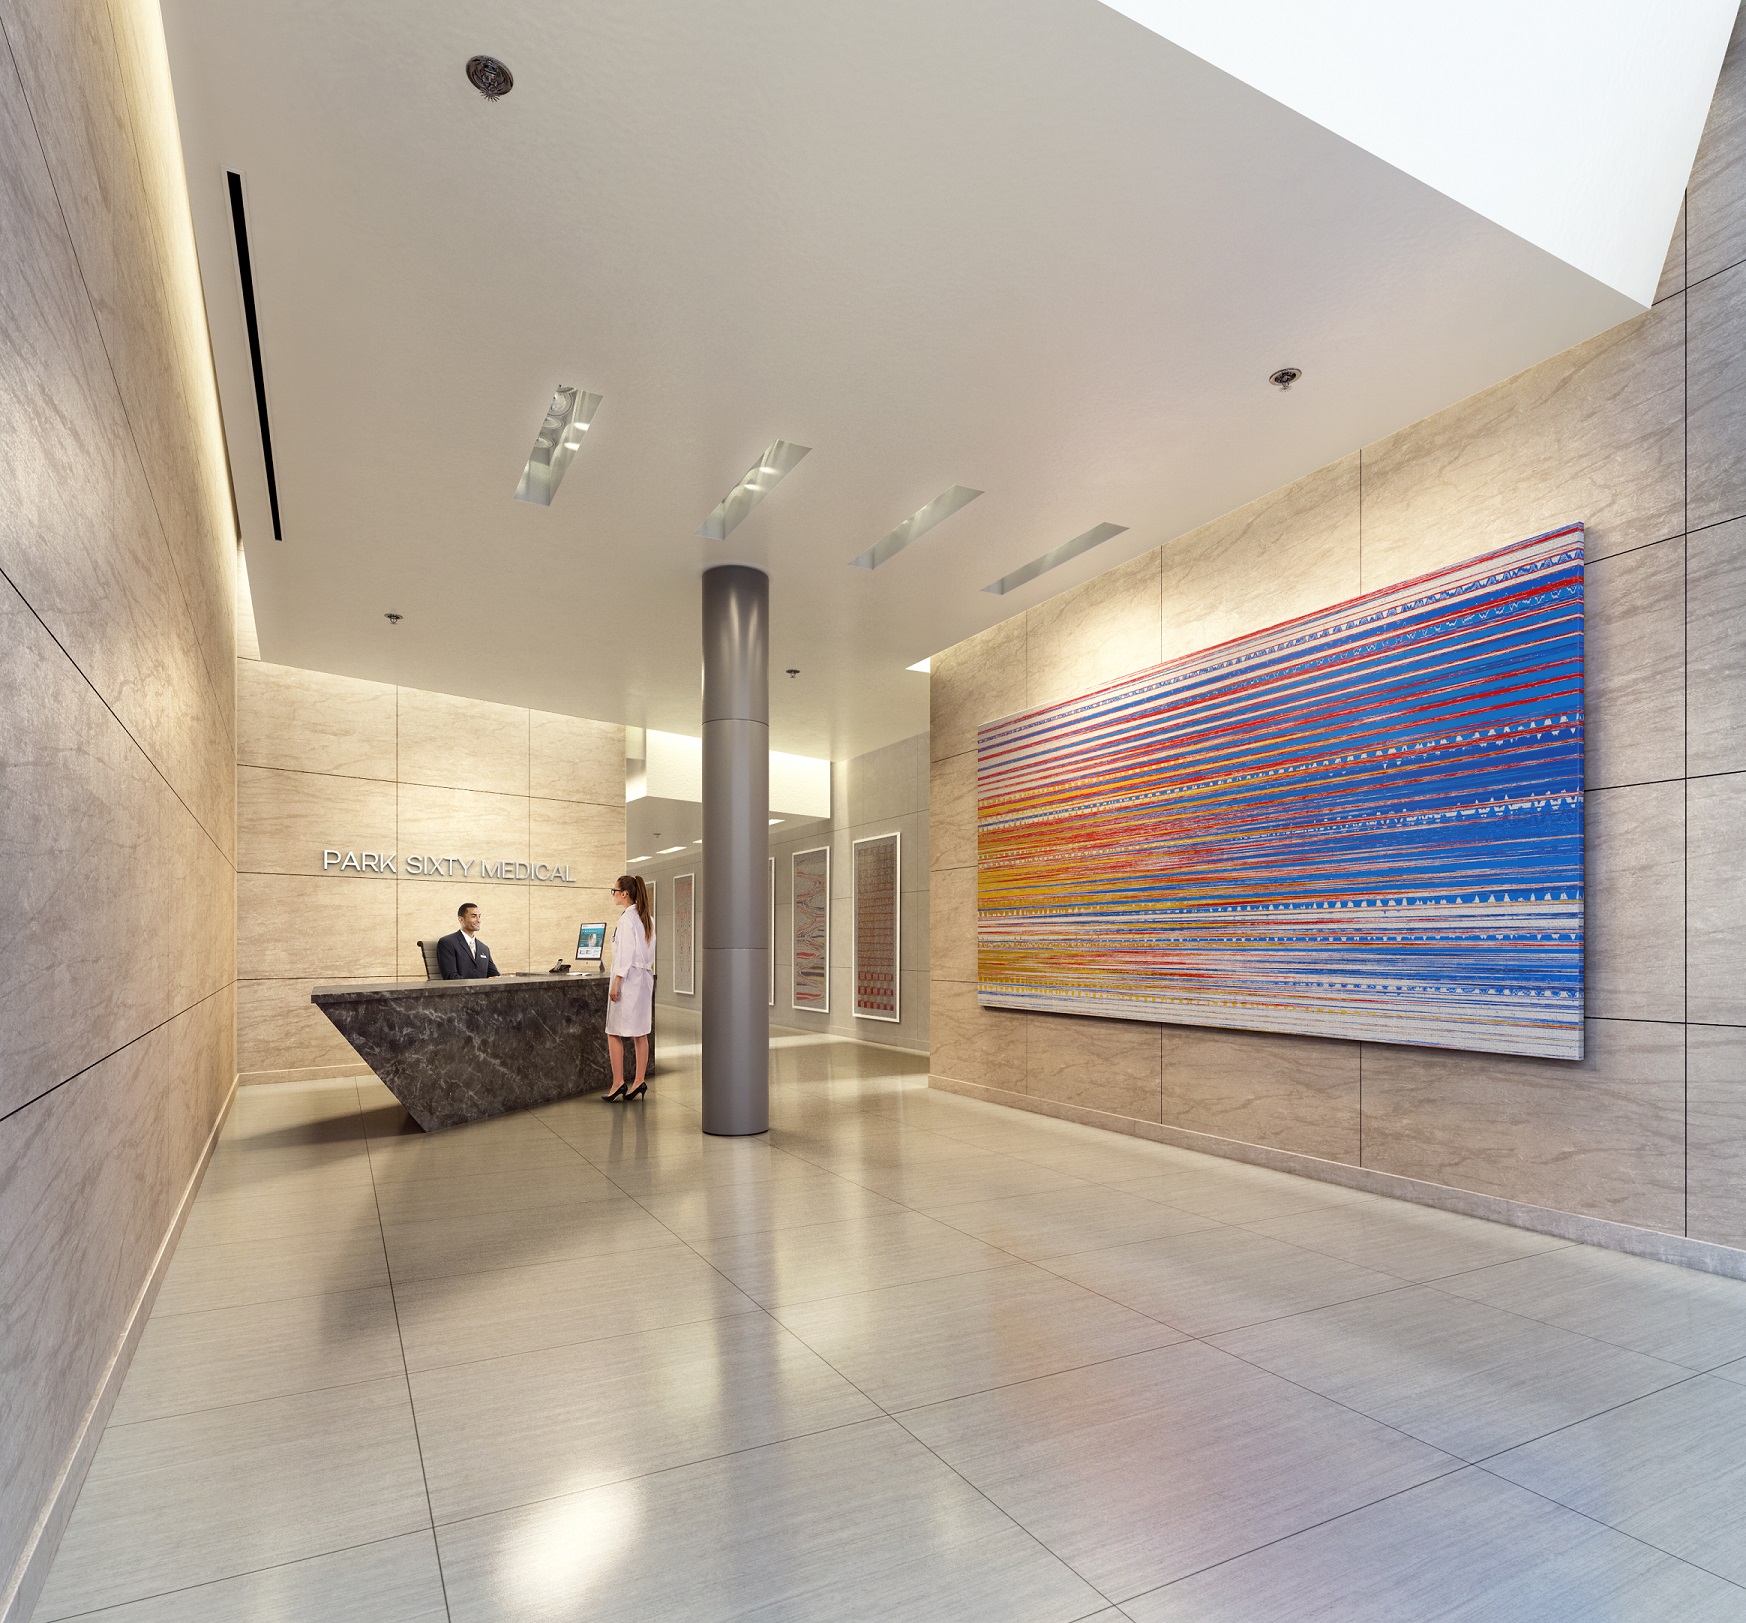 Rendering of the lobby of Park Sixty Medical located at 110 East 60th Street with MEP engineering services provided by 2L Engineering